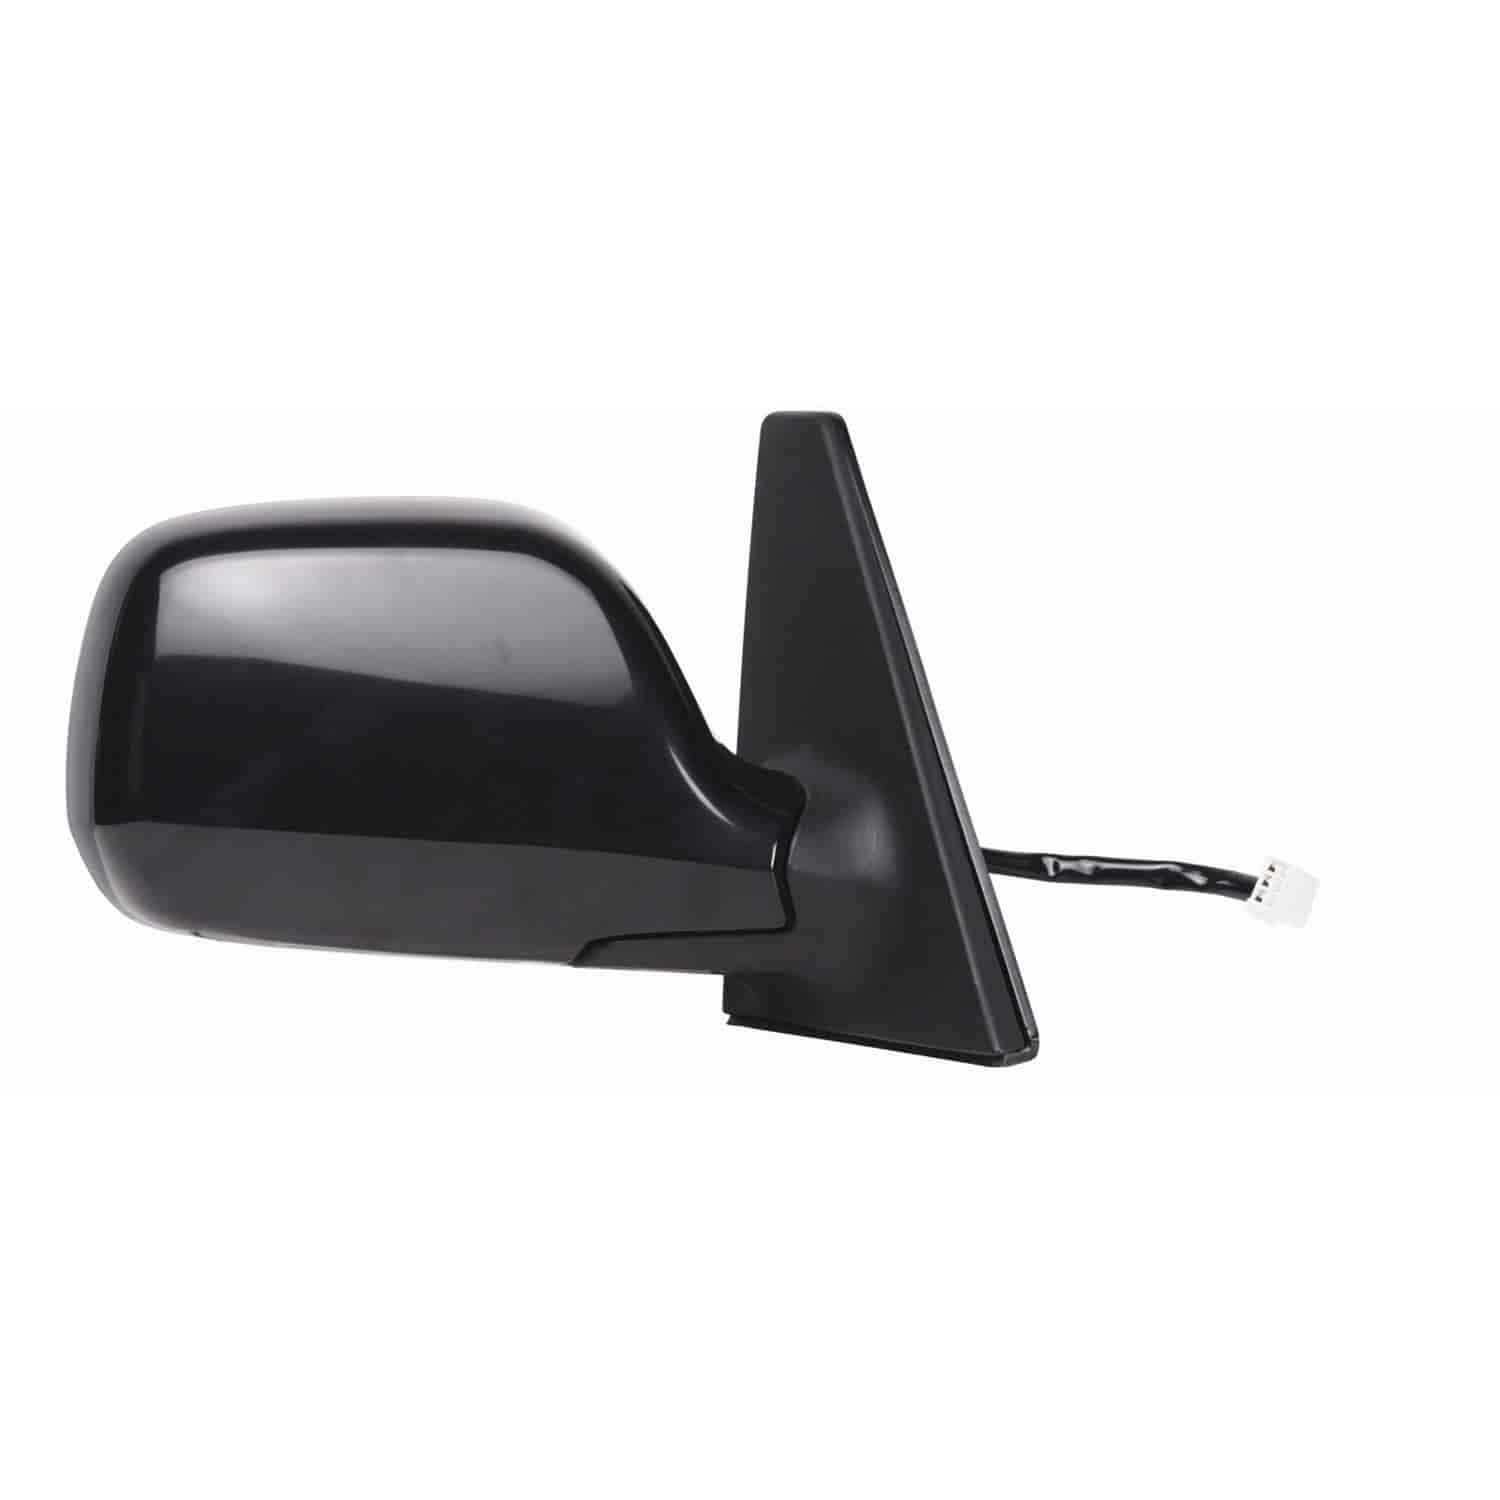 OEM Style Replacement mirror for 04-06 SCION XB passenger side mirror tested to fit and function lik